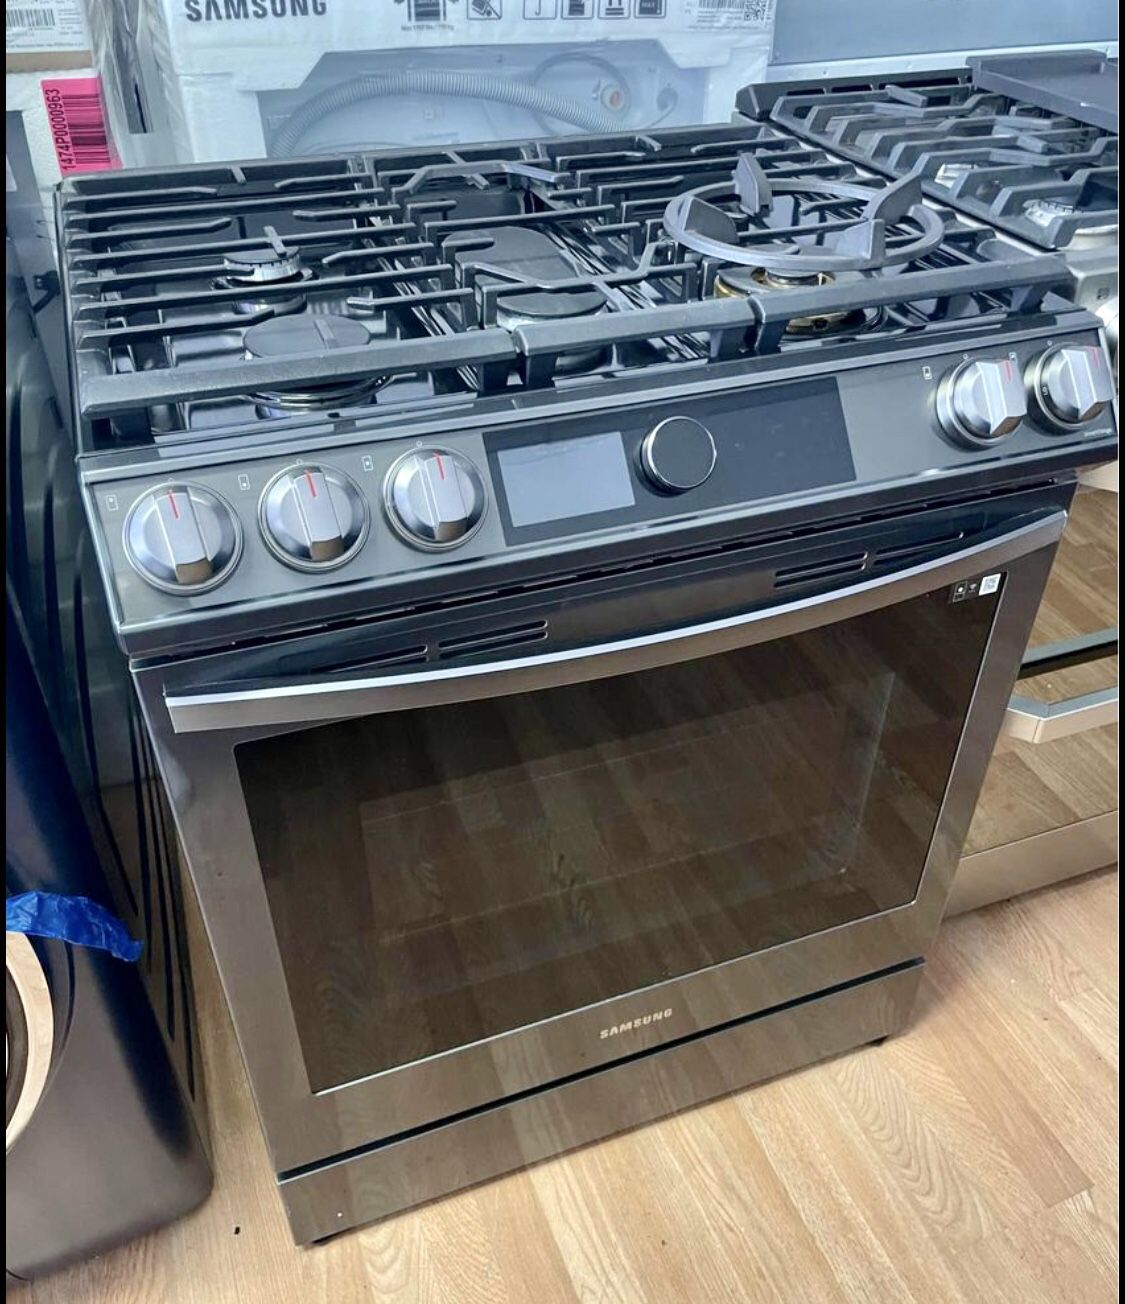 New AirFry Samsung smart dial gas range